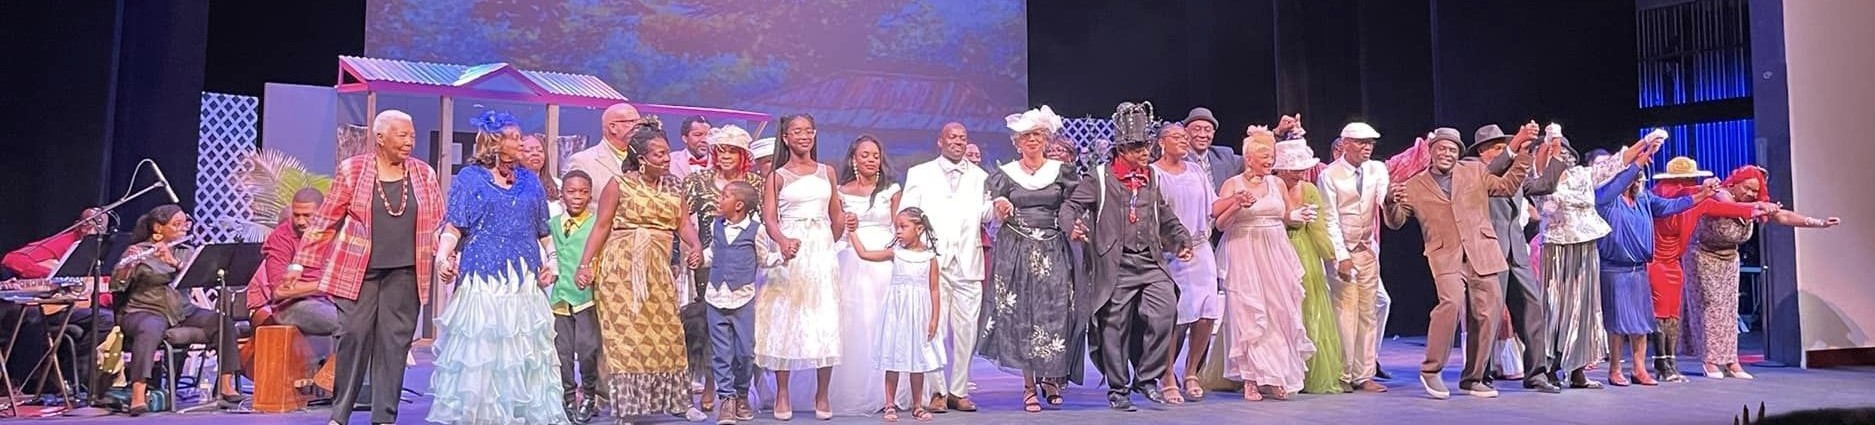 Encore Presentation of Jamaican Pantomime ‘Ol’ Time Sinting Come Back Again’ on November 26 at LPAC